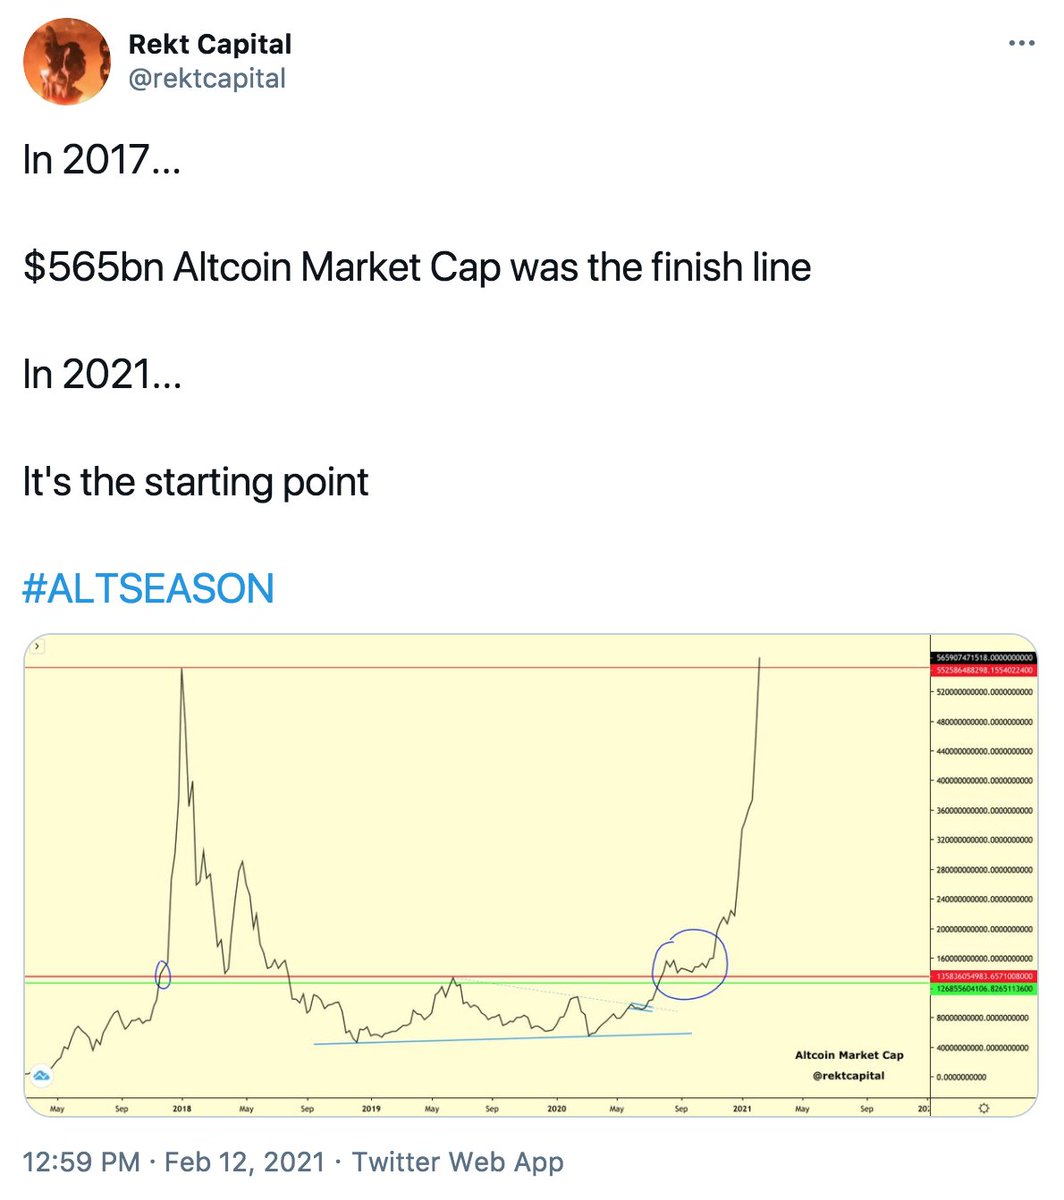 4. Altcoin Market Cap finally revisited the 2017 highs...And broke themAltcoin Market Cap is now in Discovery modeBut why is this so important?Let's take a look at the last time Altcoin Market Cap broke its old All Time High to appreciate why... #ALTSEASON